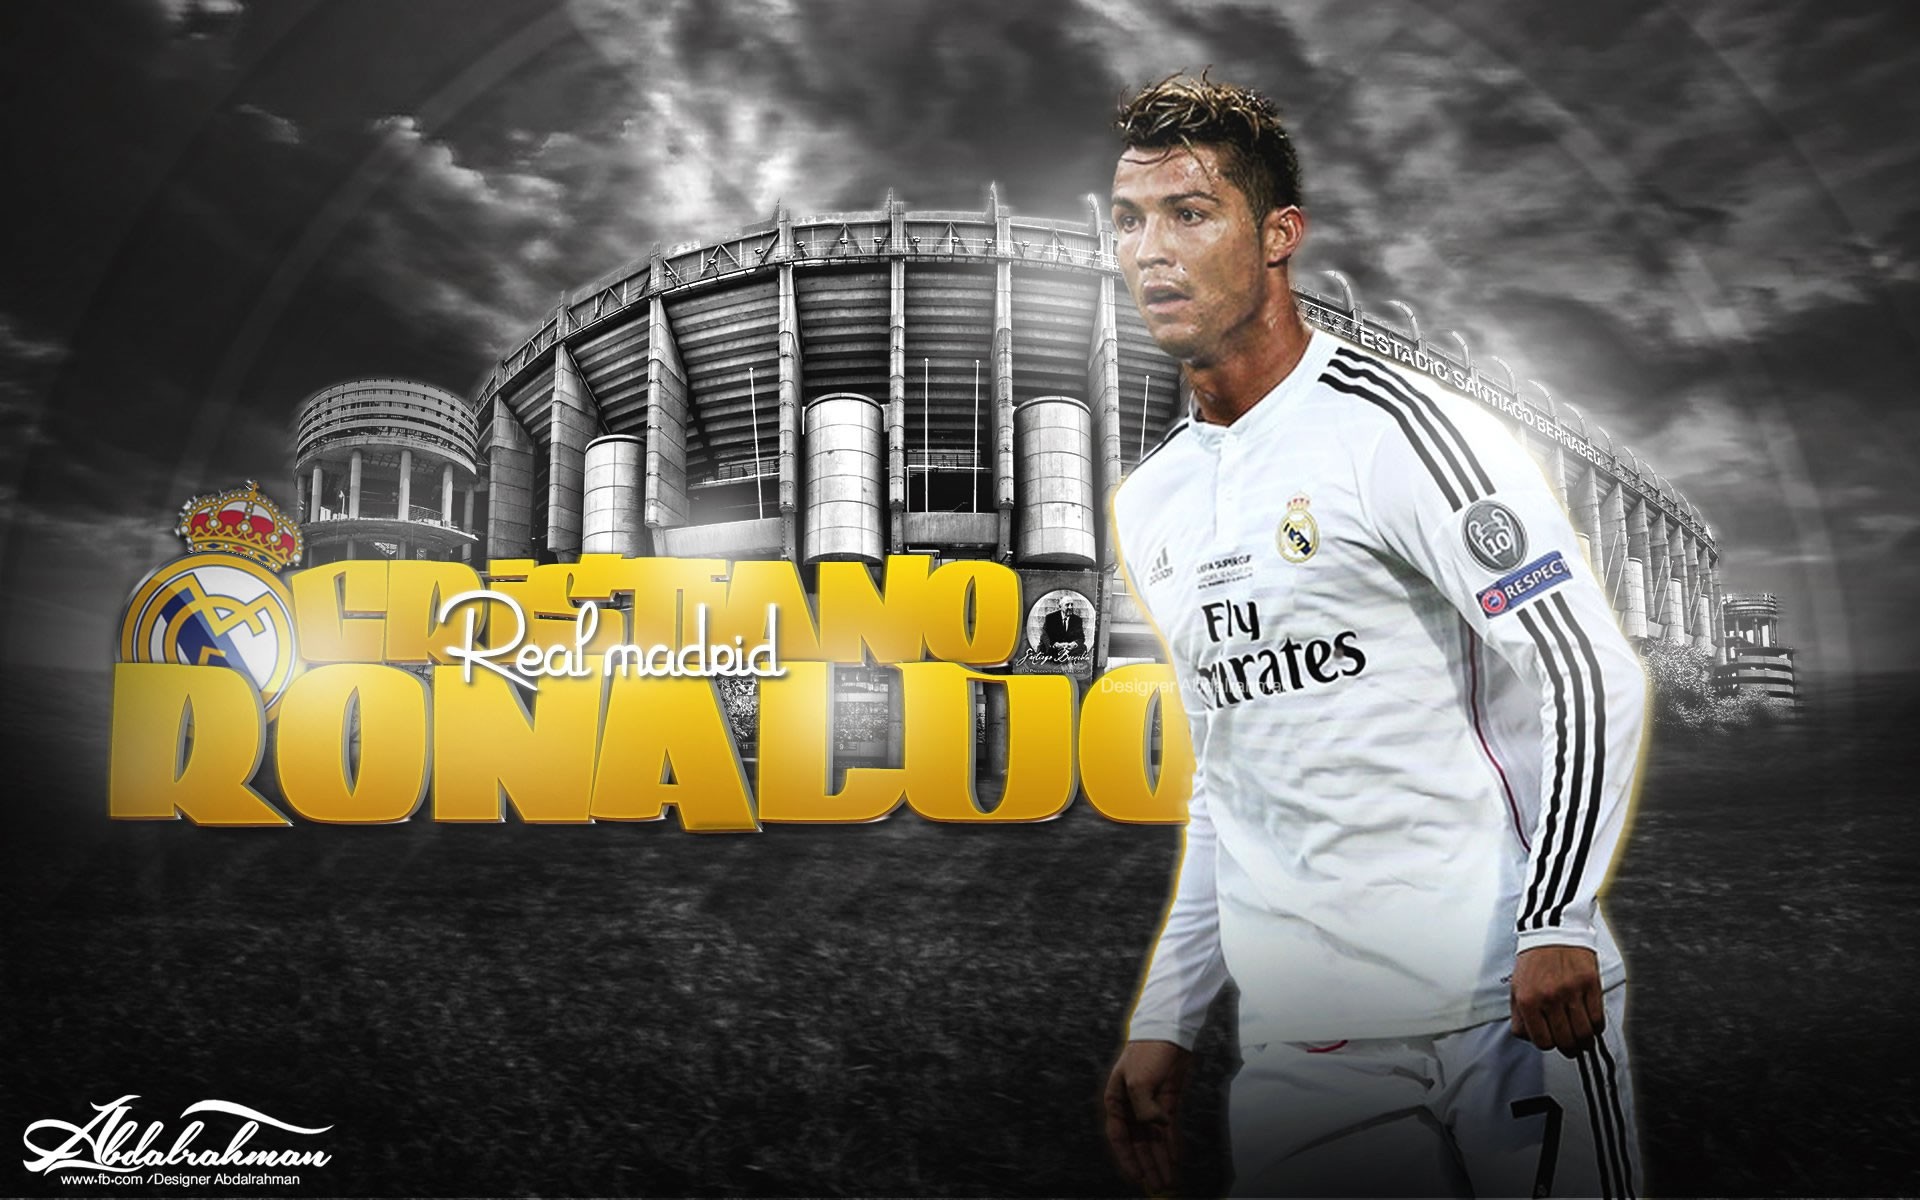 CR7 Wallpaper Download Free Awesome Full HD Backgrounds For